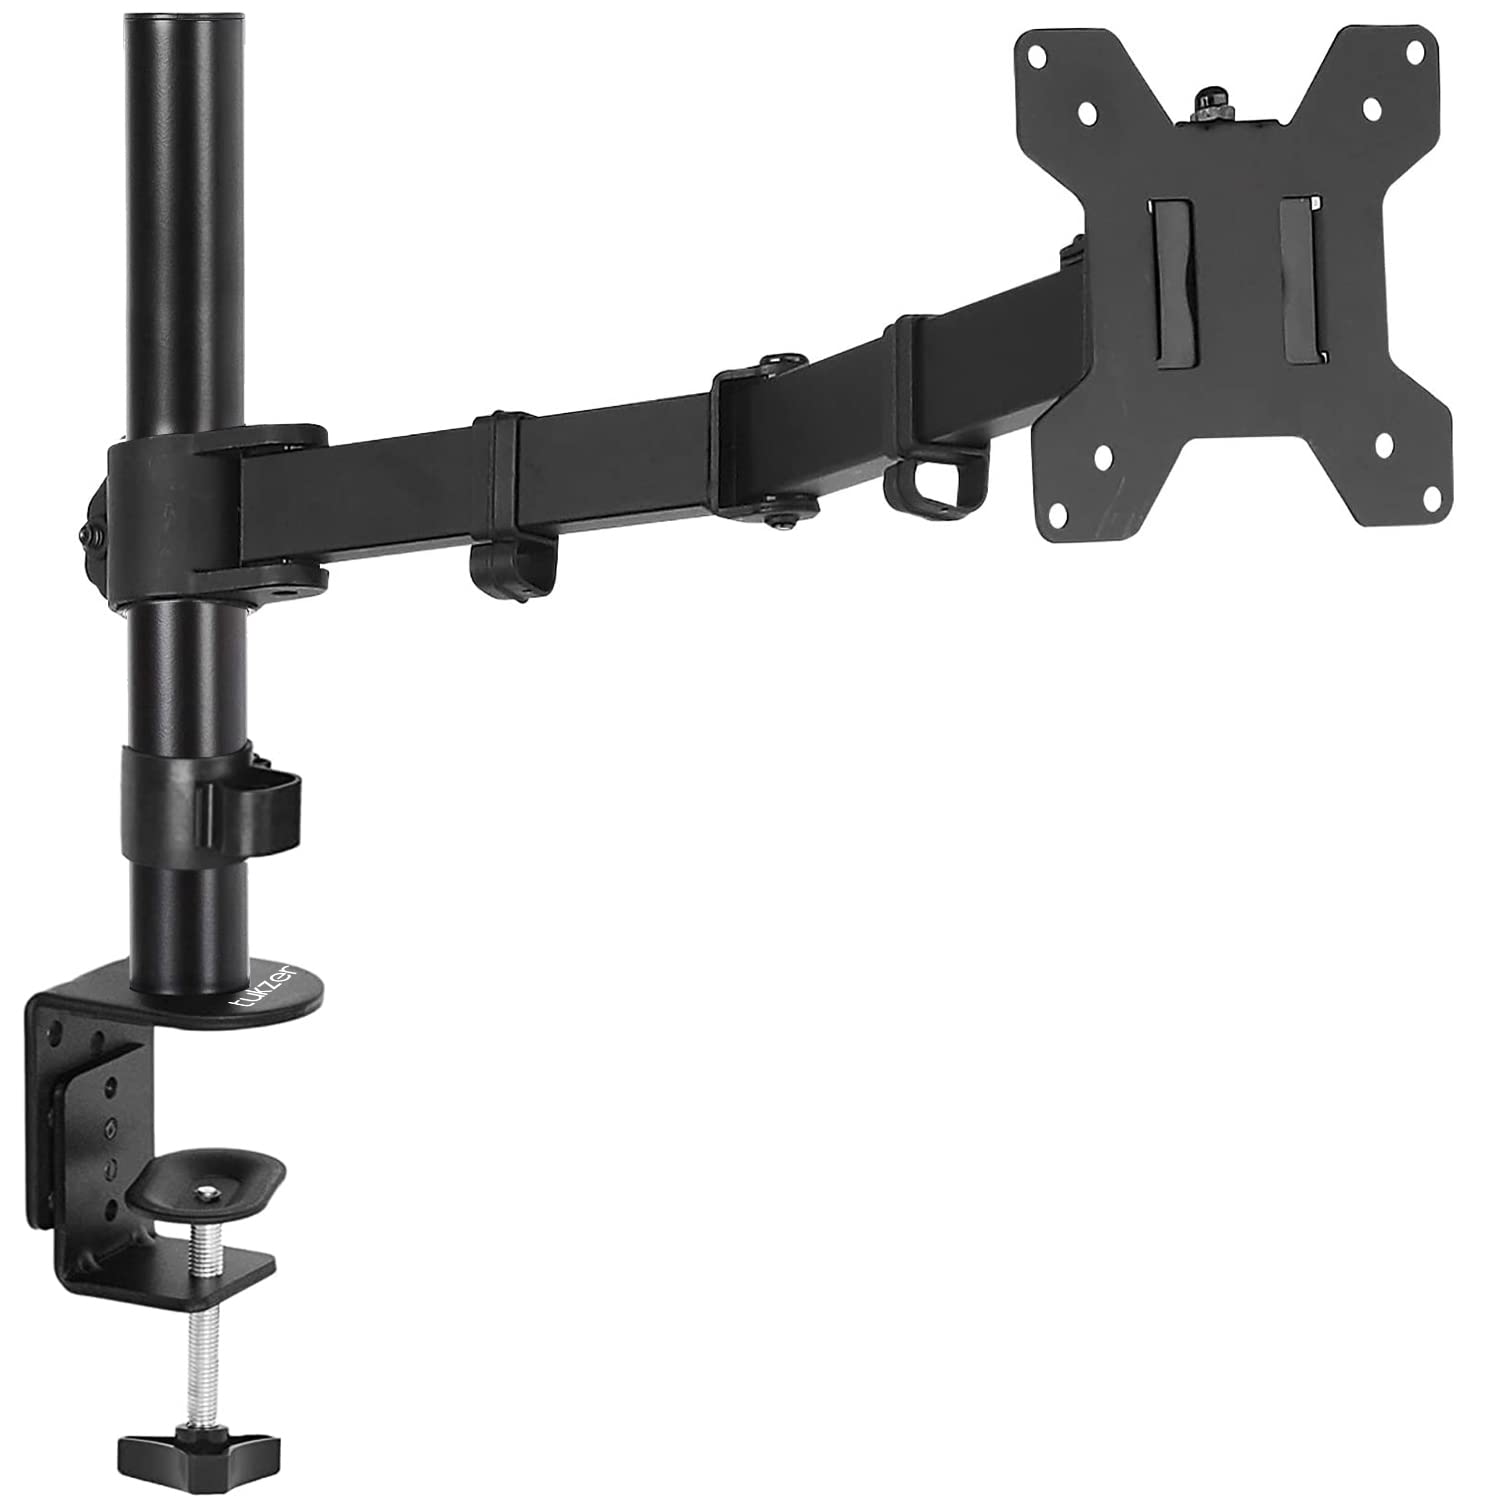 Tukzer Professional Desktop Tablet Stand Mobile Holder with Flexible Arm,  360° Swivel & Height Adjustament| Anti-Skid Sturdy & Heavy Metal Base for